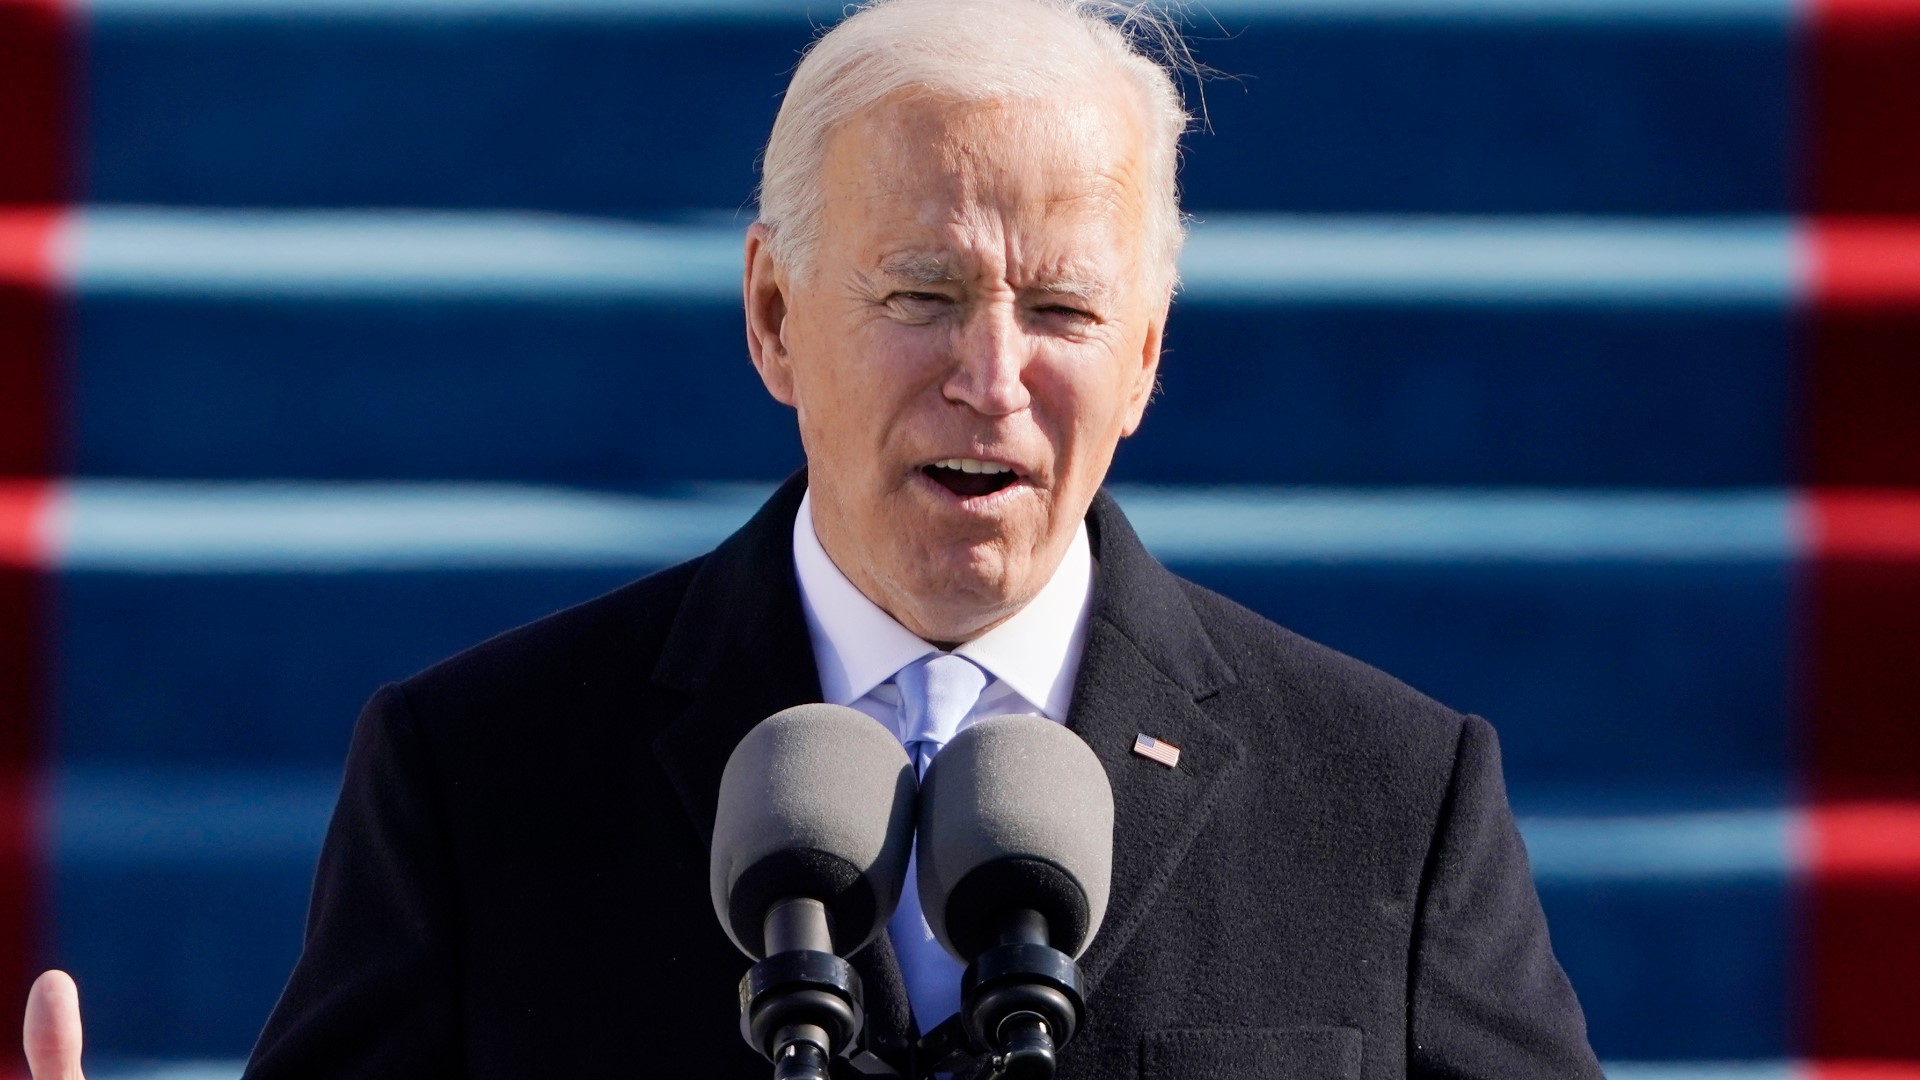 Joseph R. Biden Jr. was sworn in as the 46th president of the United States on Wednesday Jan. 20, 2021